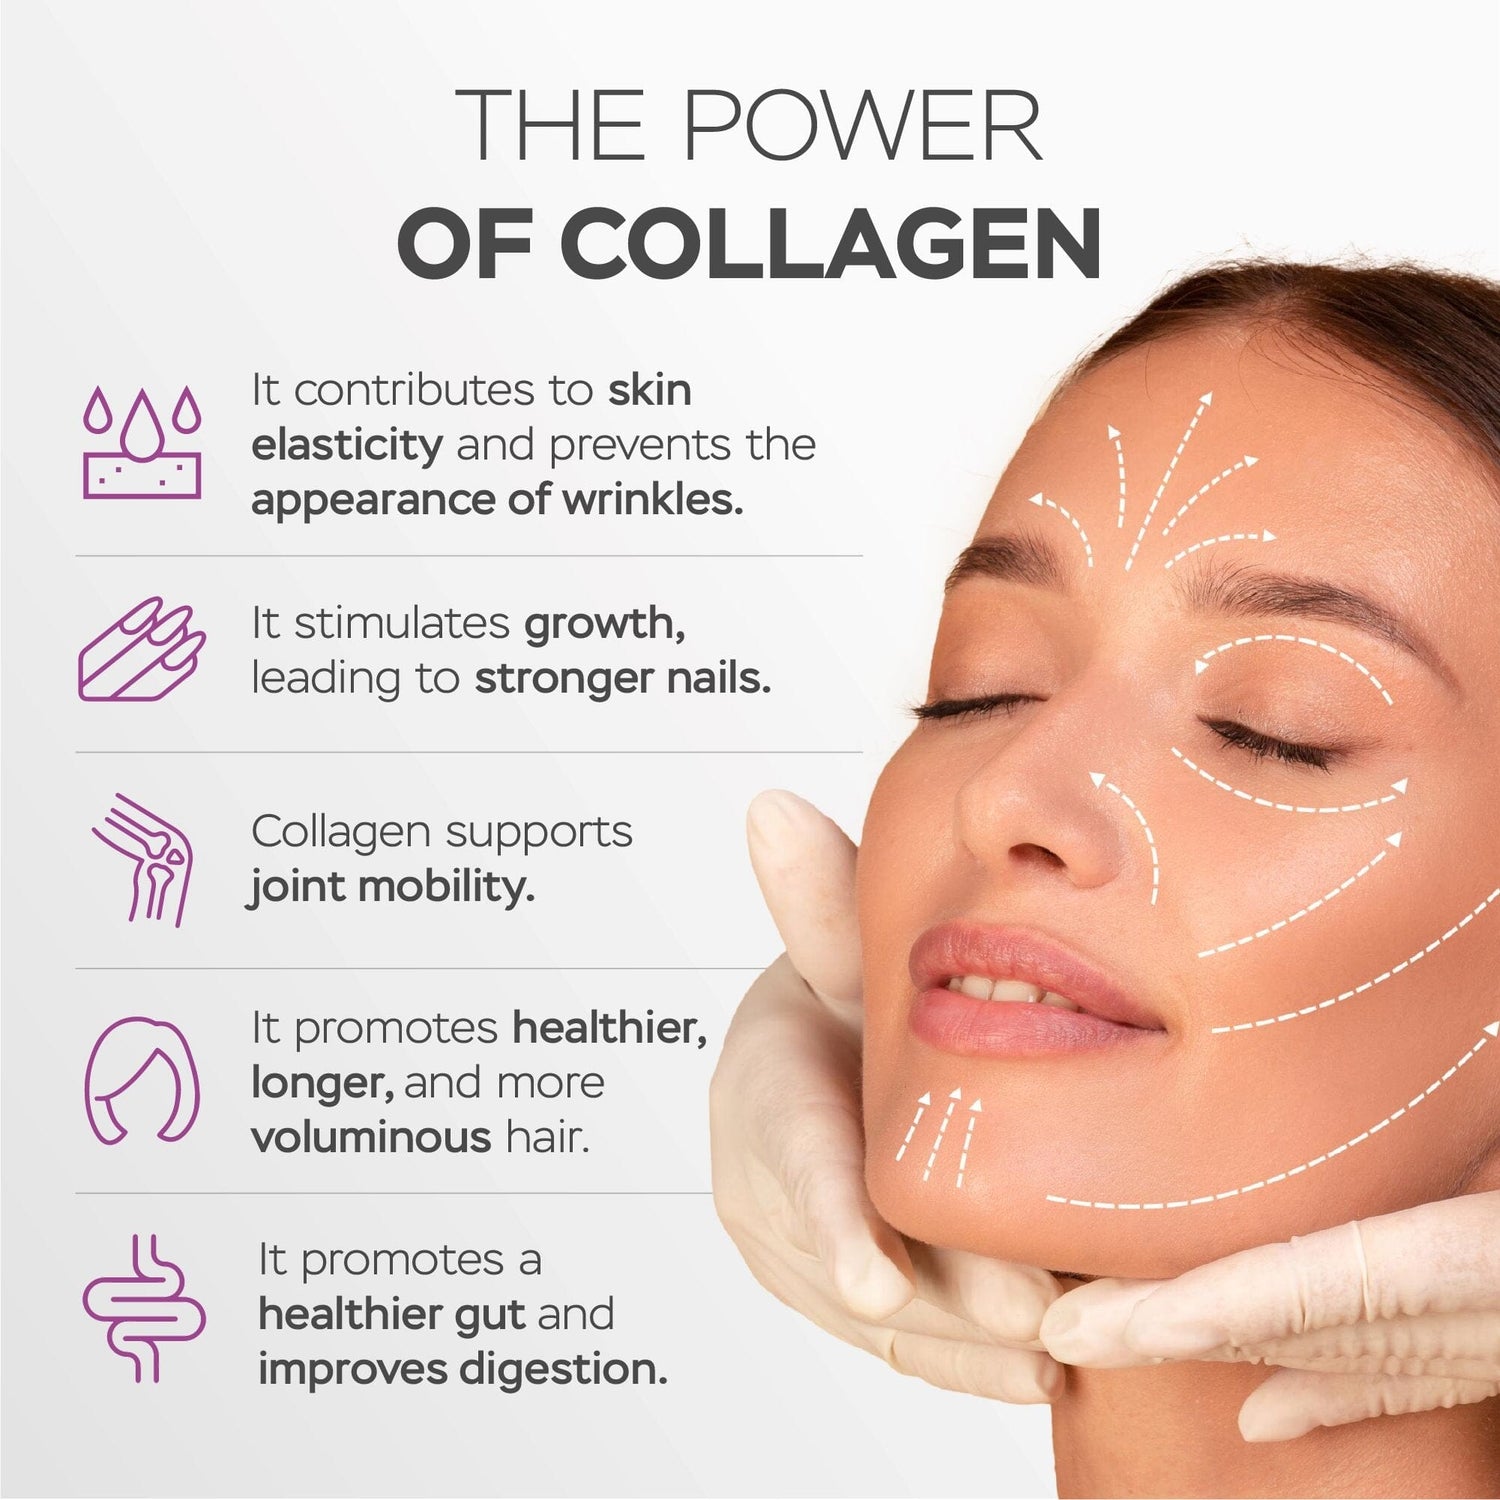 COMBO HYDROLYZED COLLAGEN WITH RESVERATROL COCONUT FLAVOR AND UNFLAVORED + HYDROLIZED COLLAGEN CAPSULES